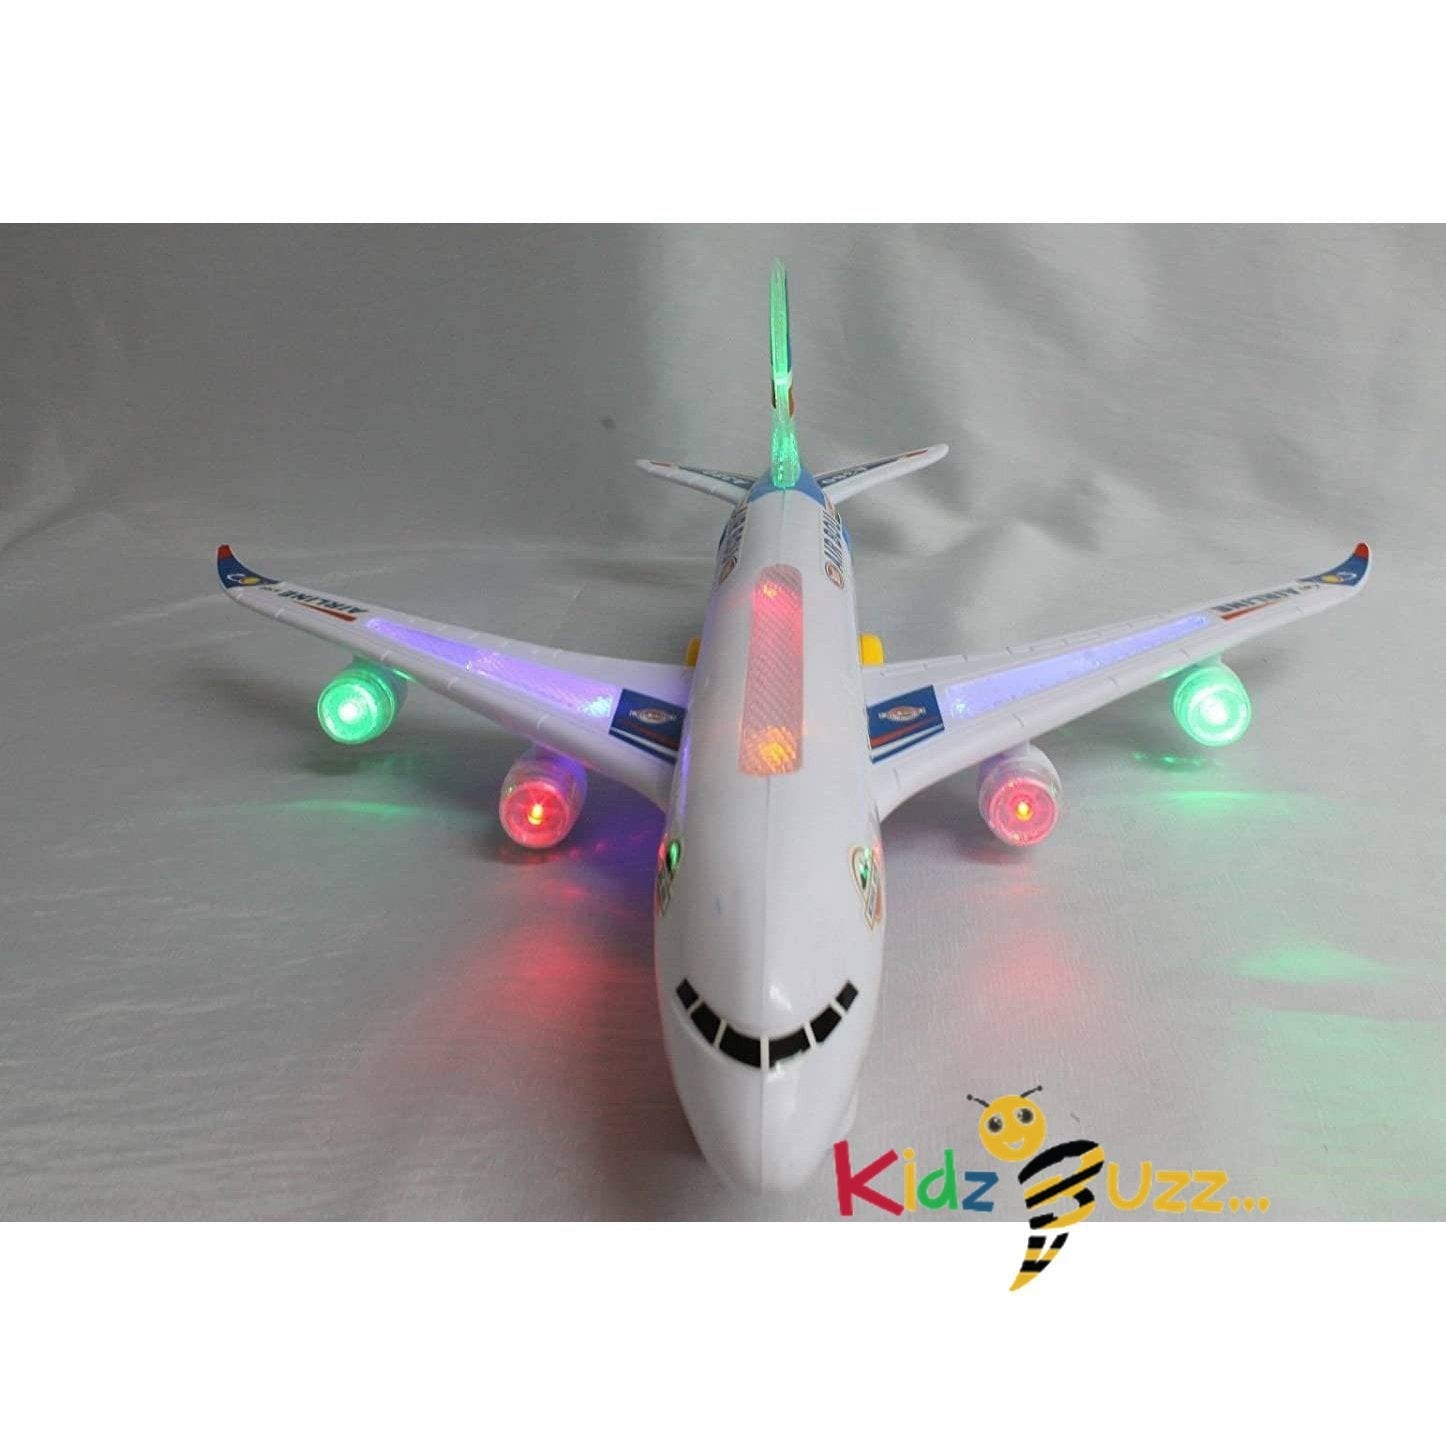 AIRBUS A380 AEROPLANE ELECTRIC TOY WITH LIGHTS AND SOUND